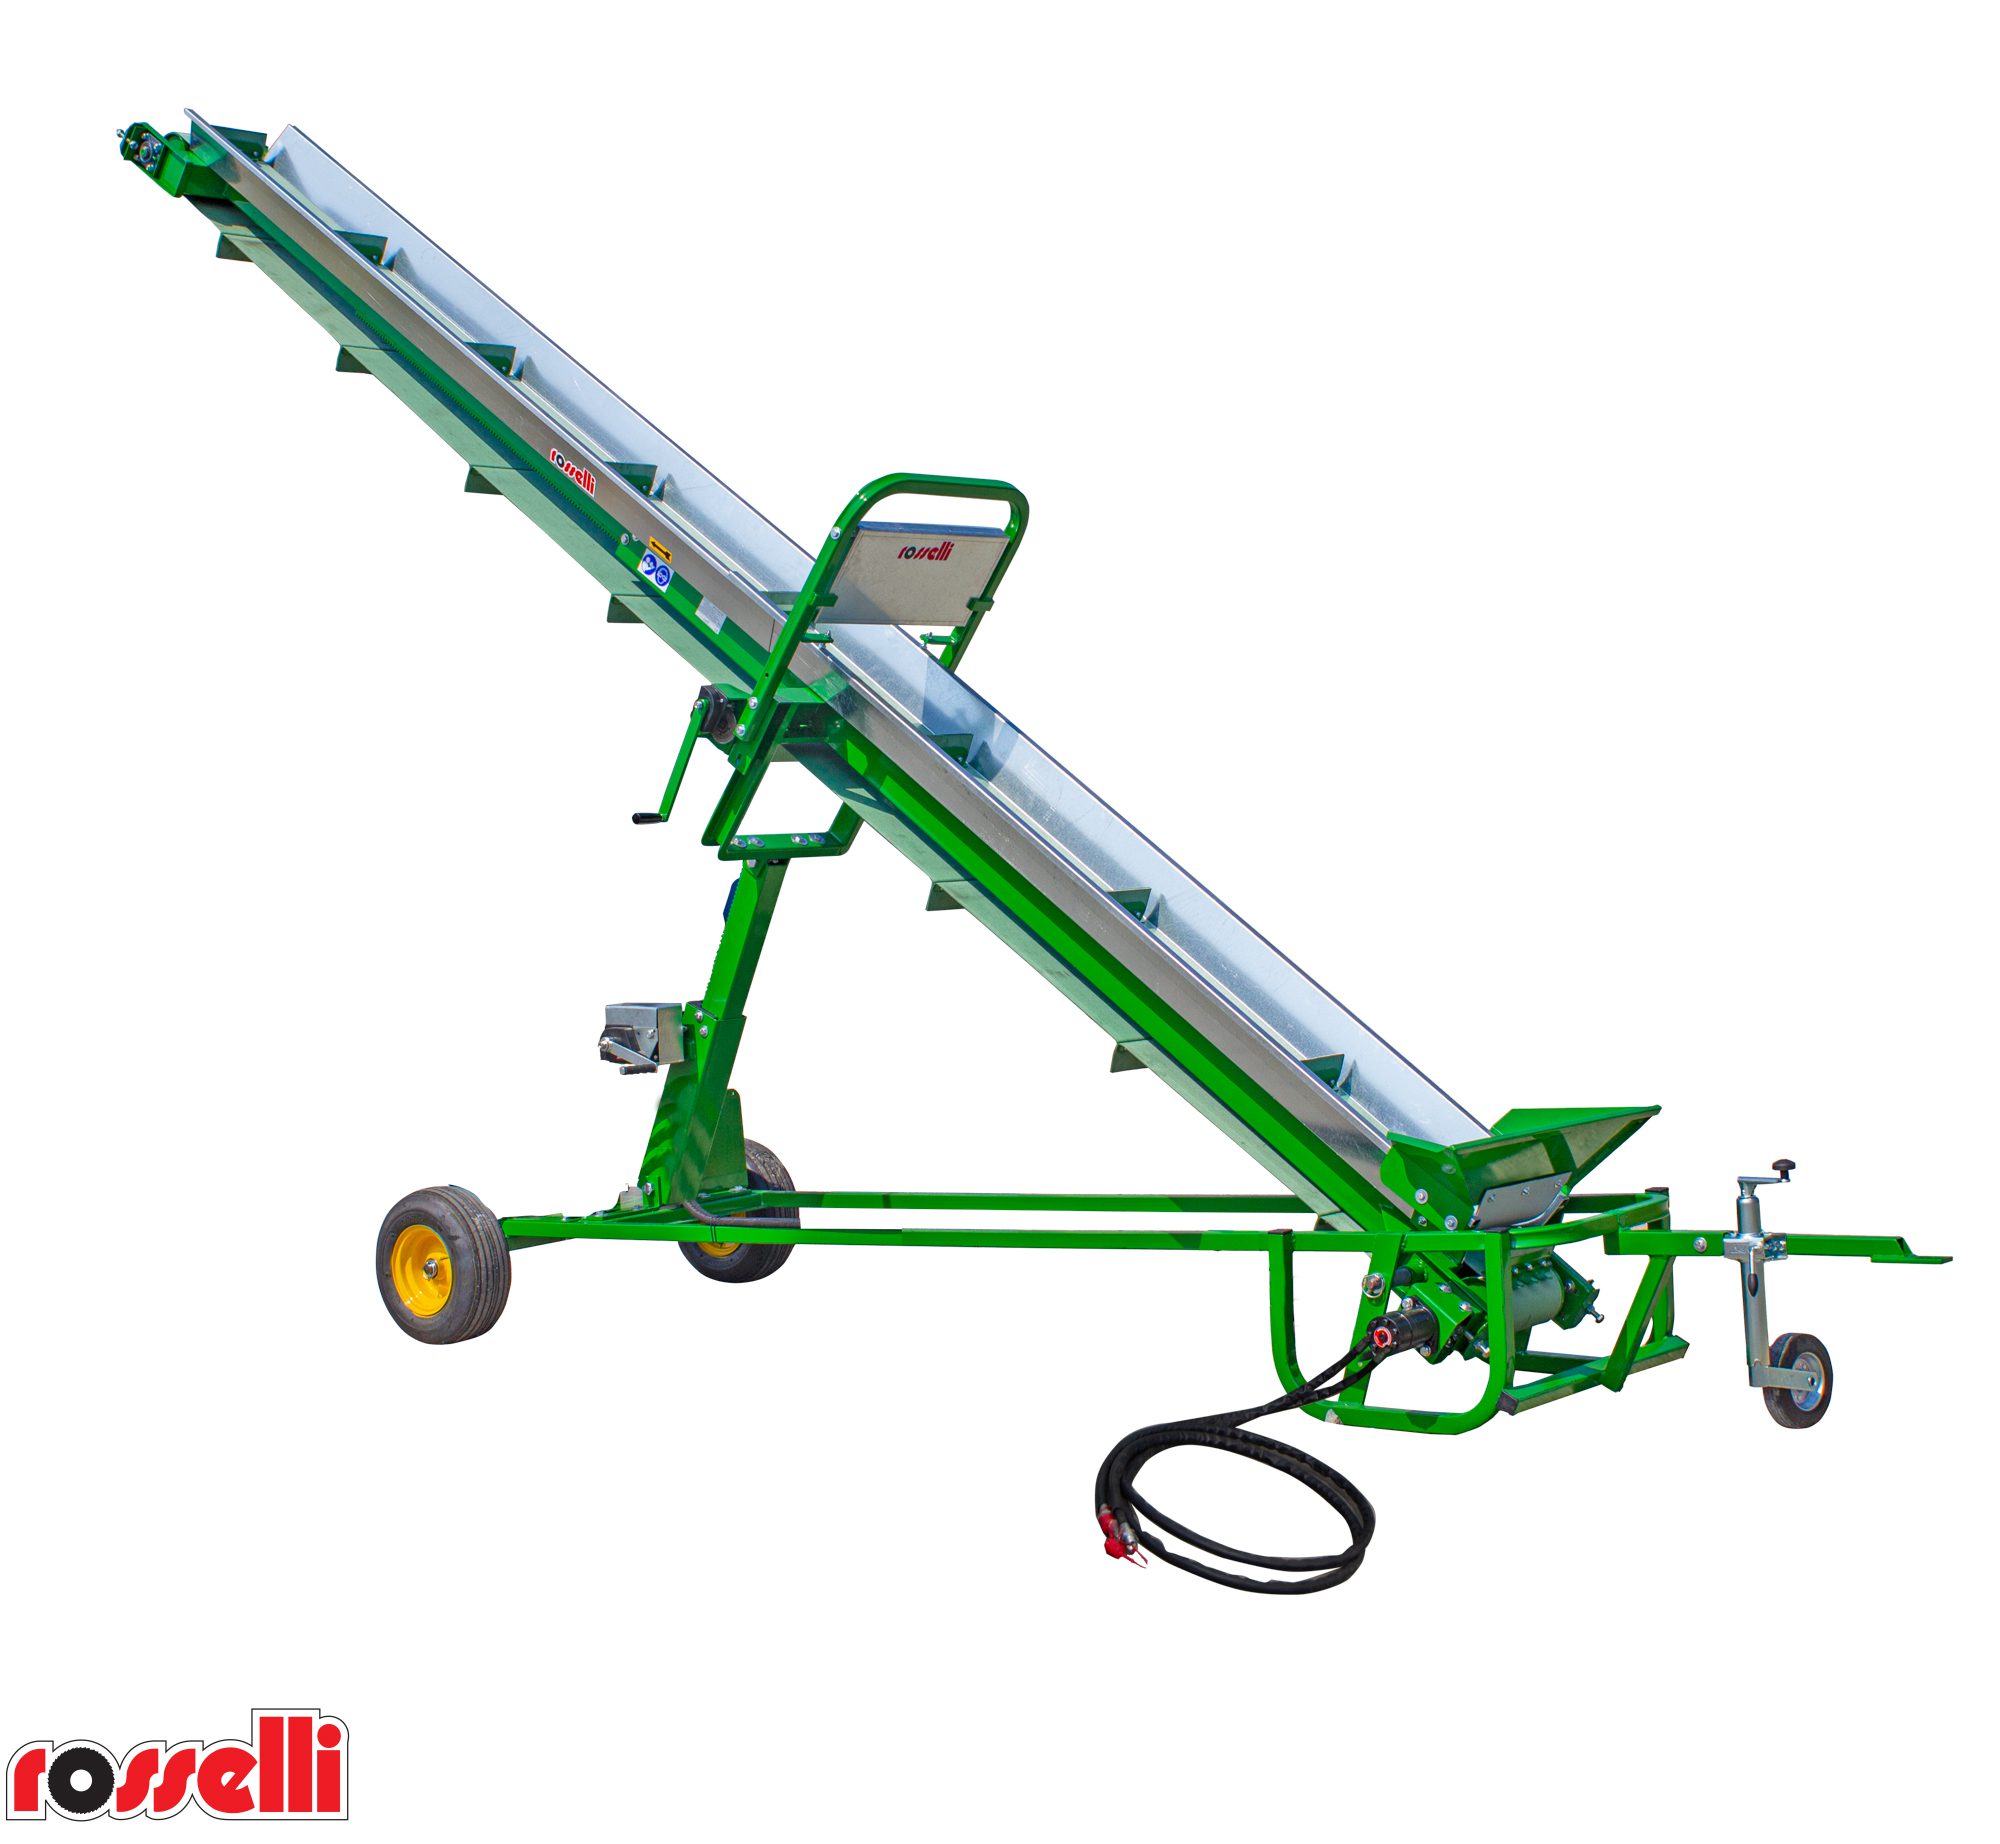 Conveyor belt towable by tractor with hydraulic connection